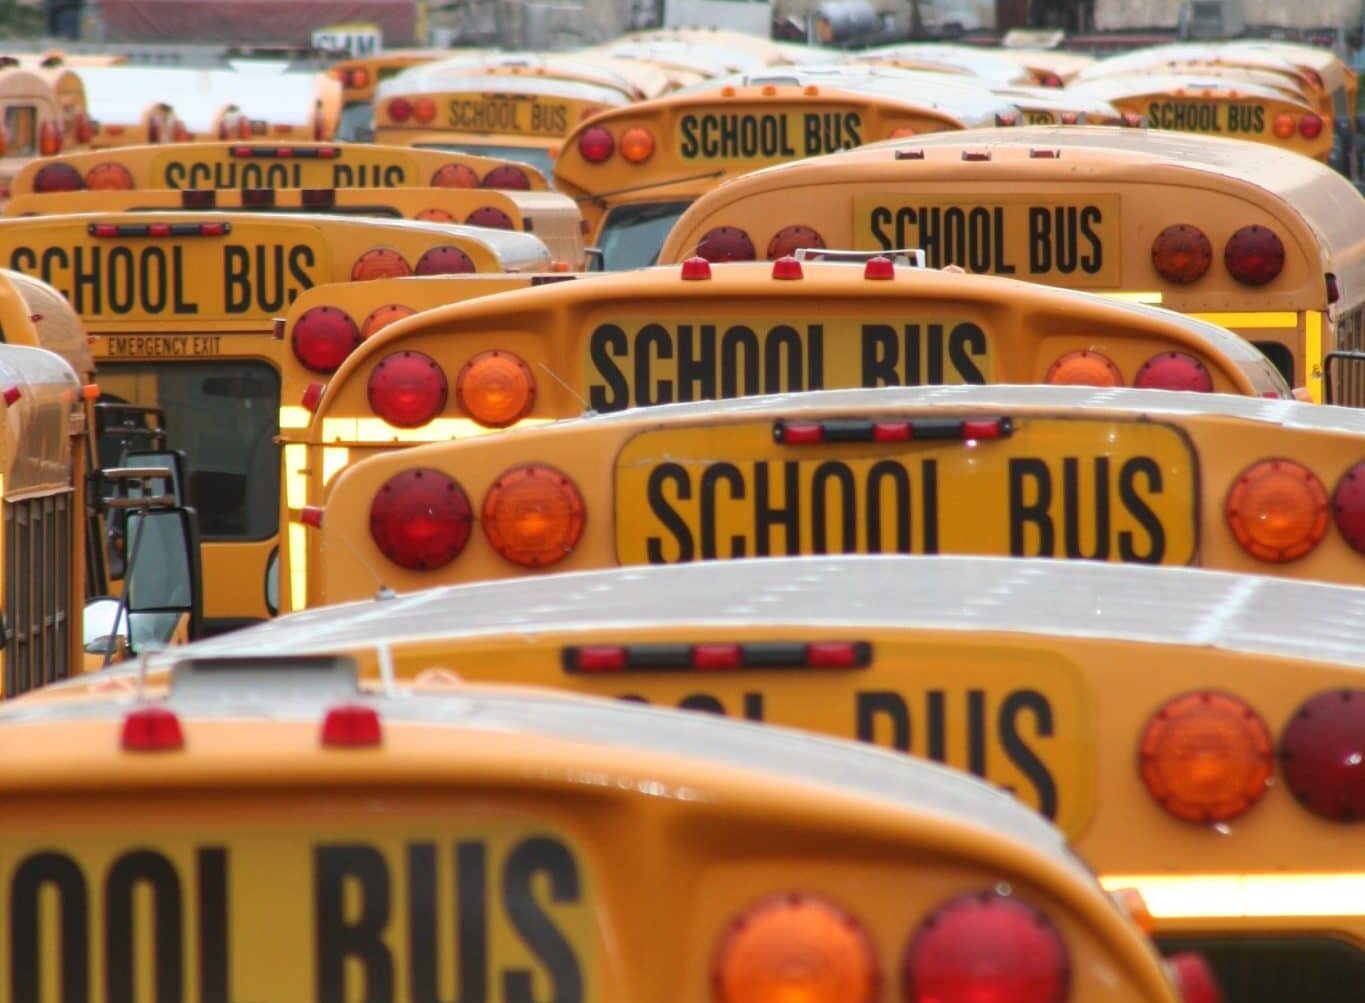 Georgia Law Enforcement: Get ready for the return of school buses